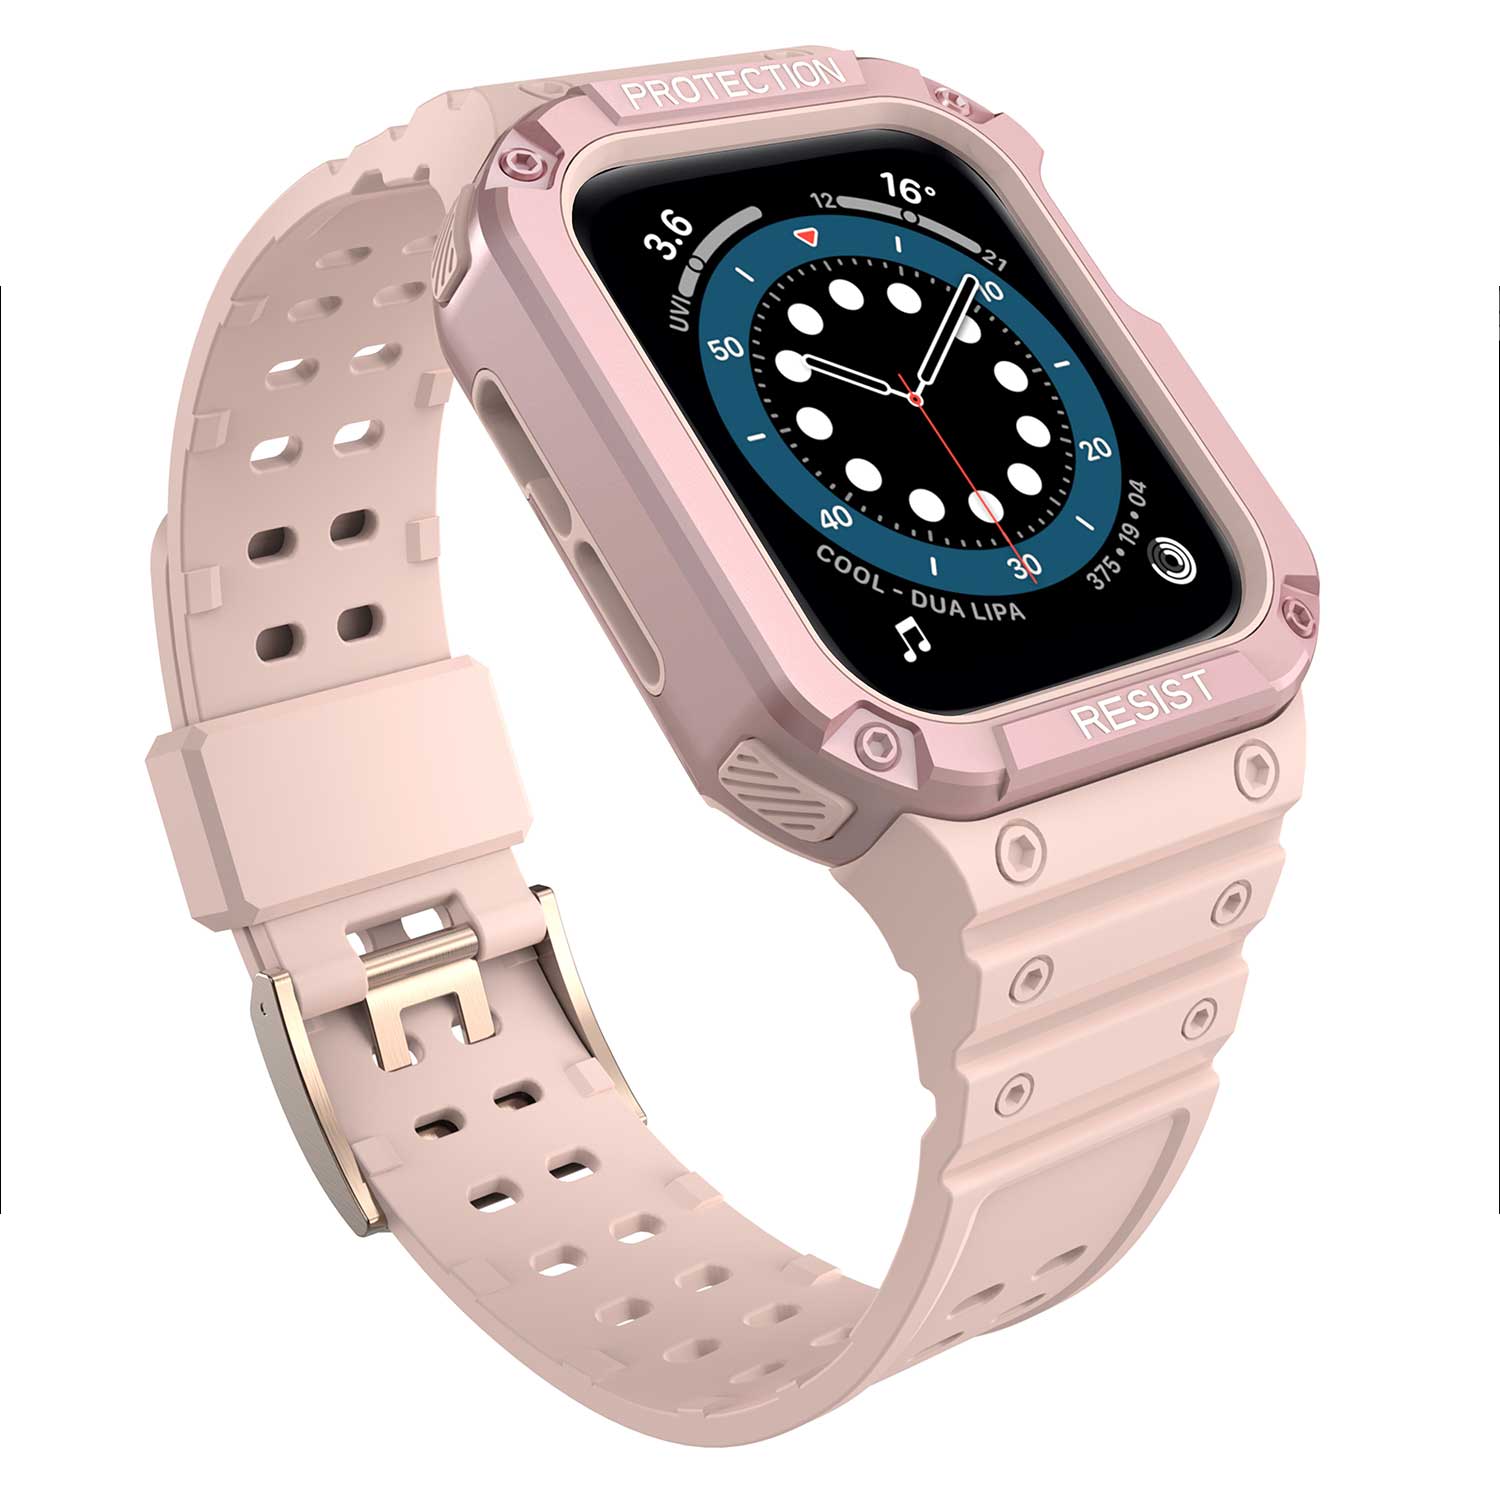 Tough On Apple Watch Band with Case Series 4 / 5 / 6 / SE 44mm Rugged Protection Pink/Pink